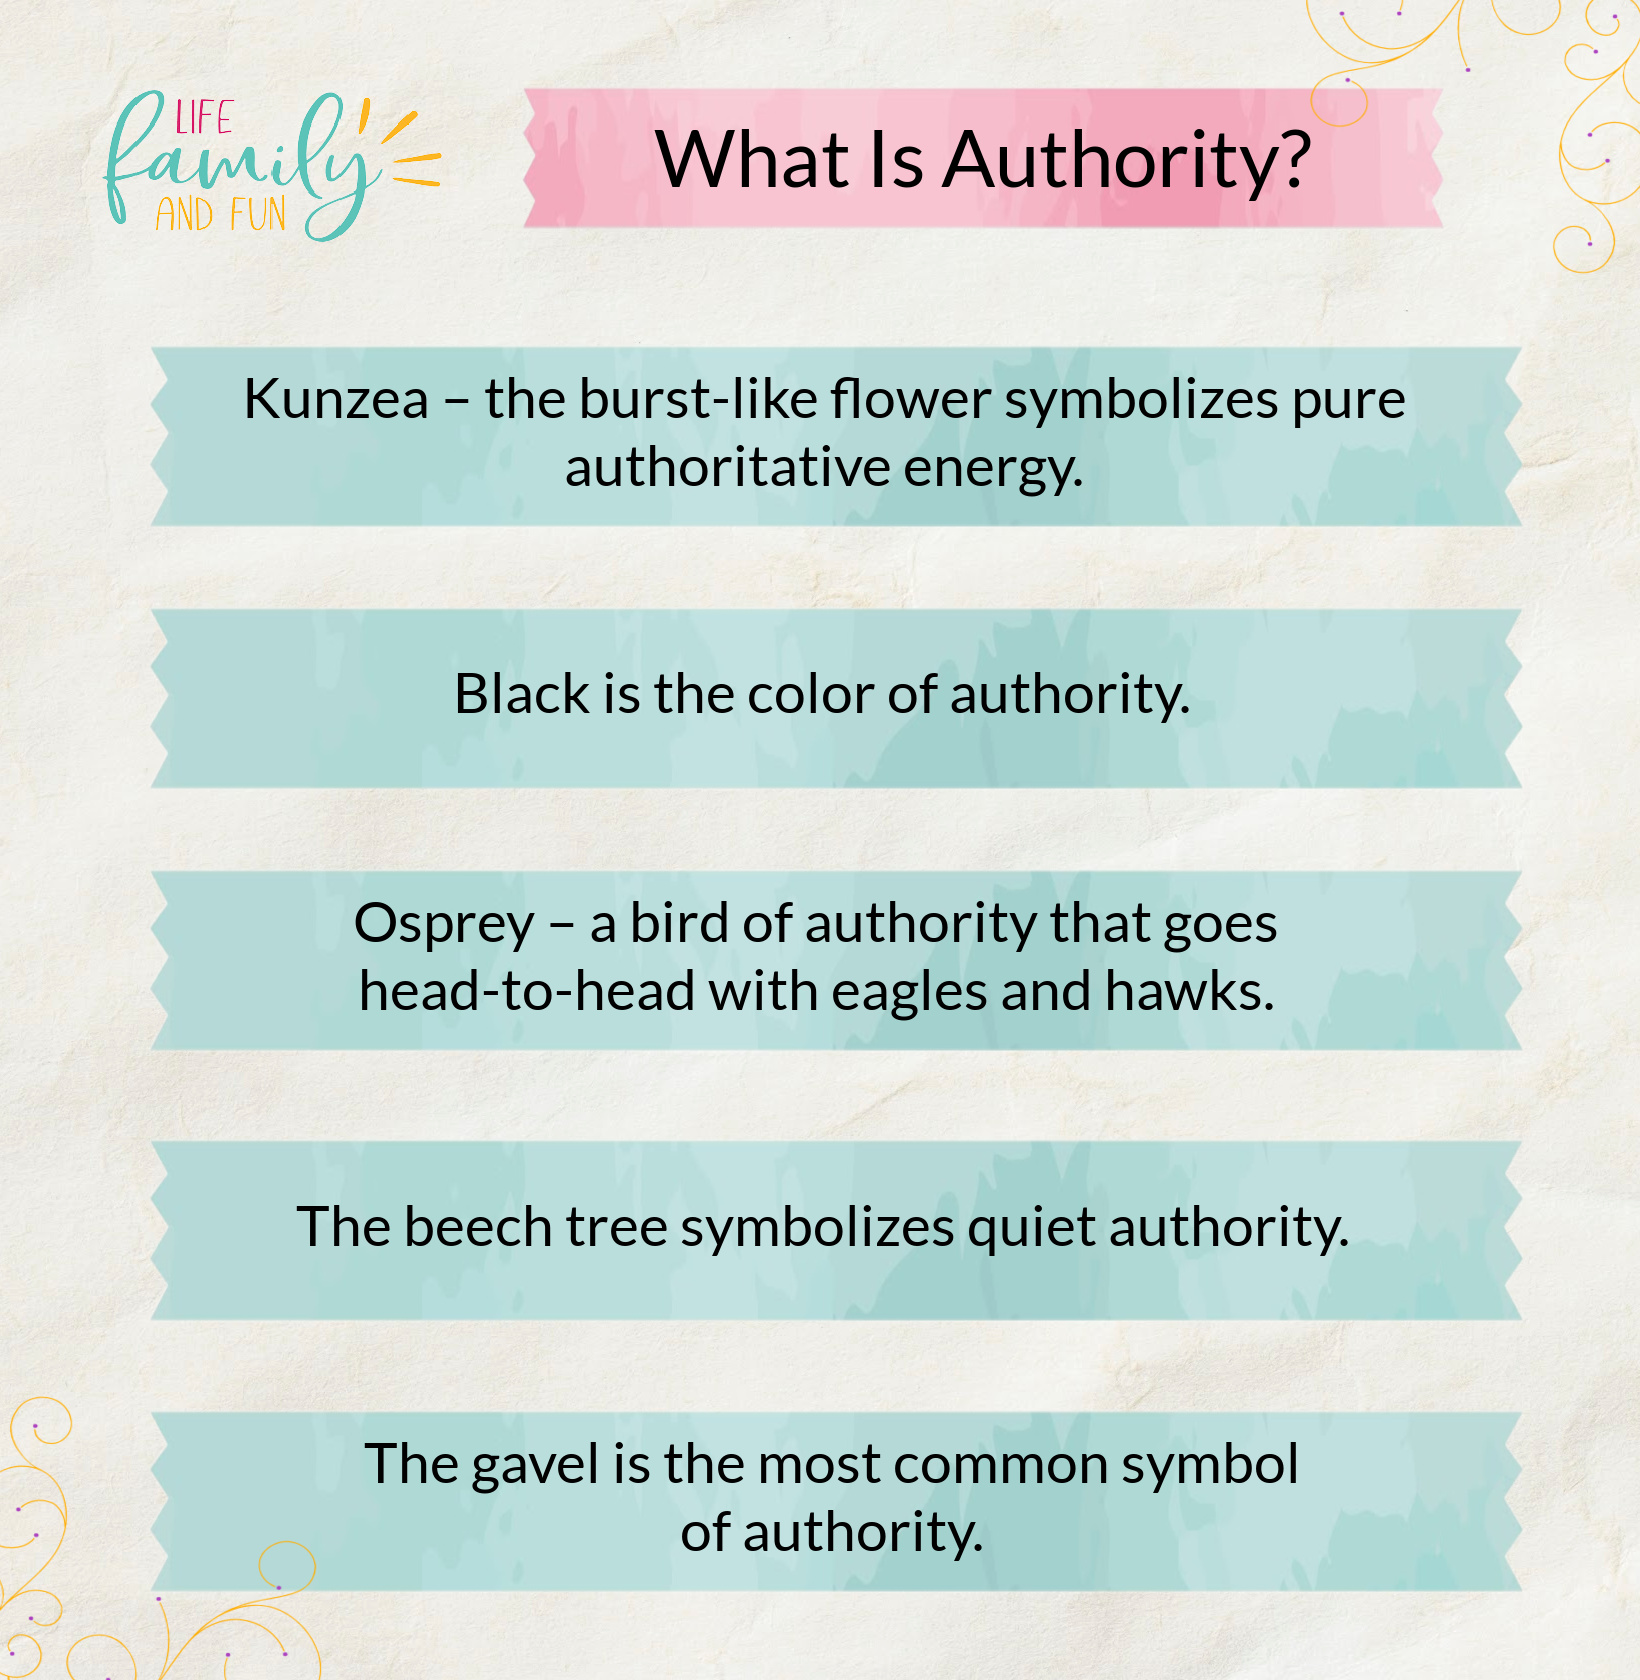 What Is Authority?